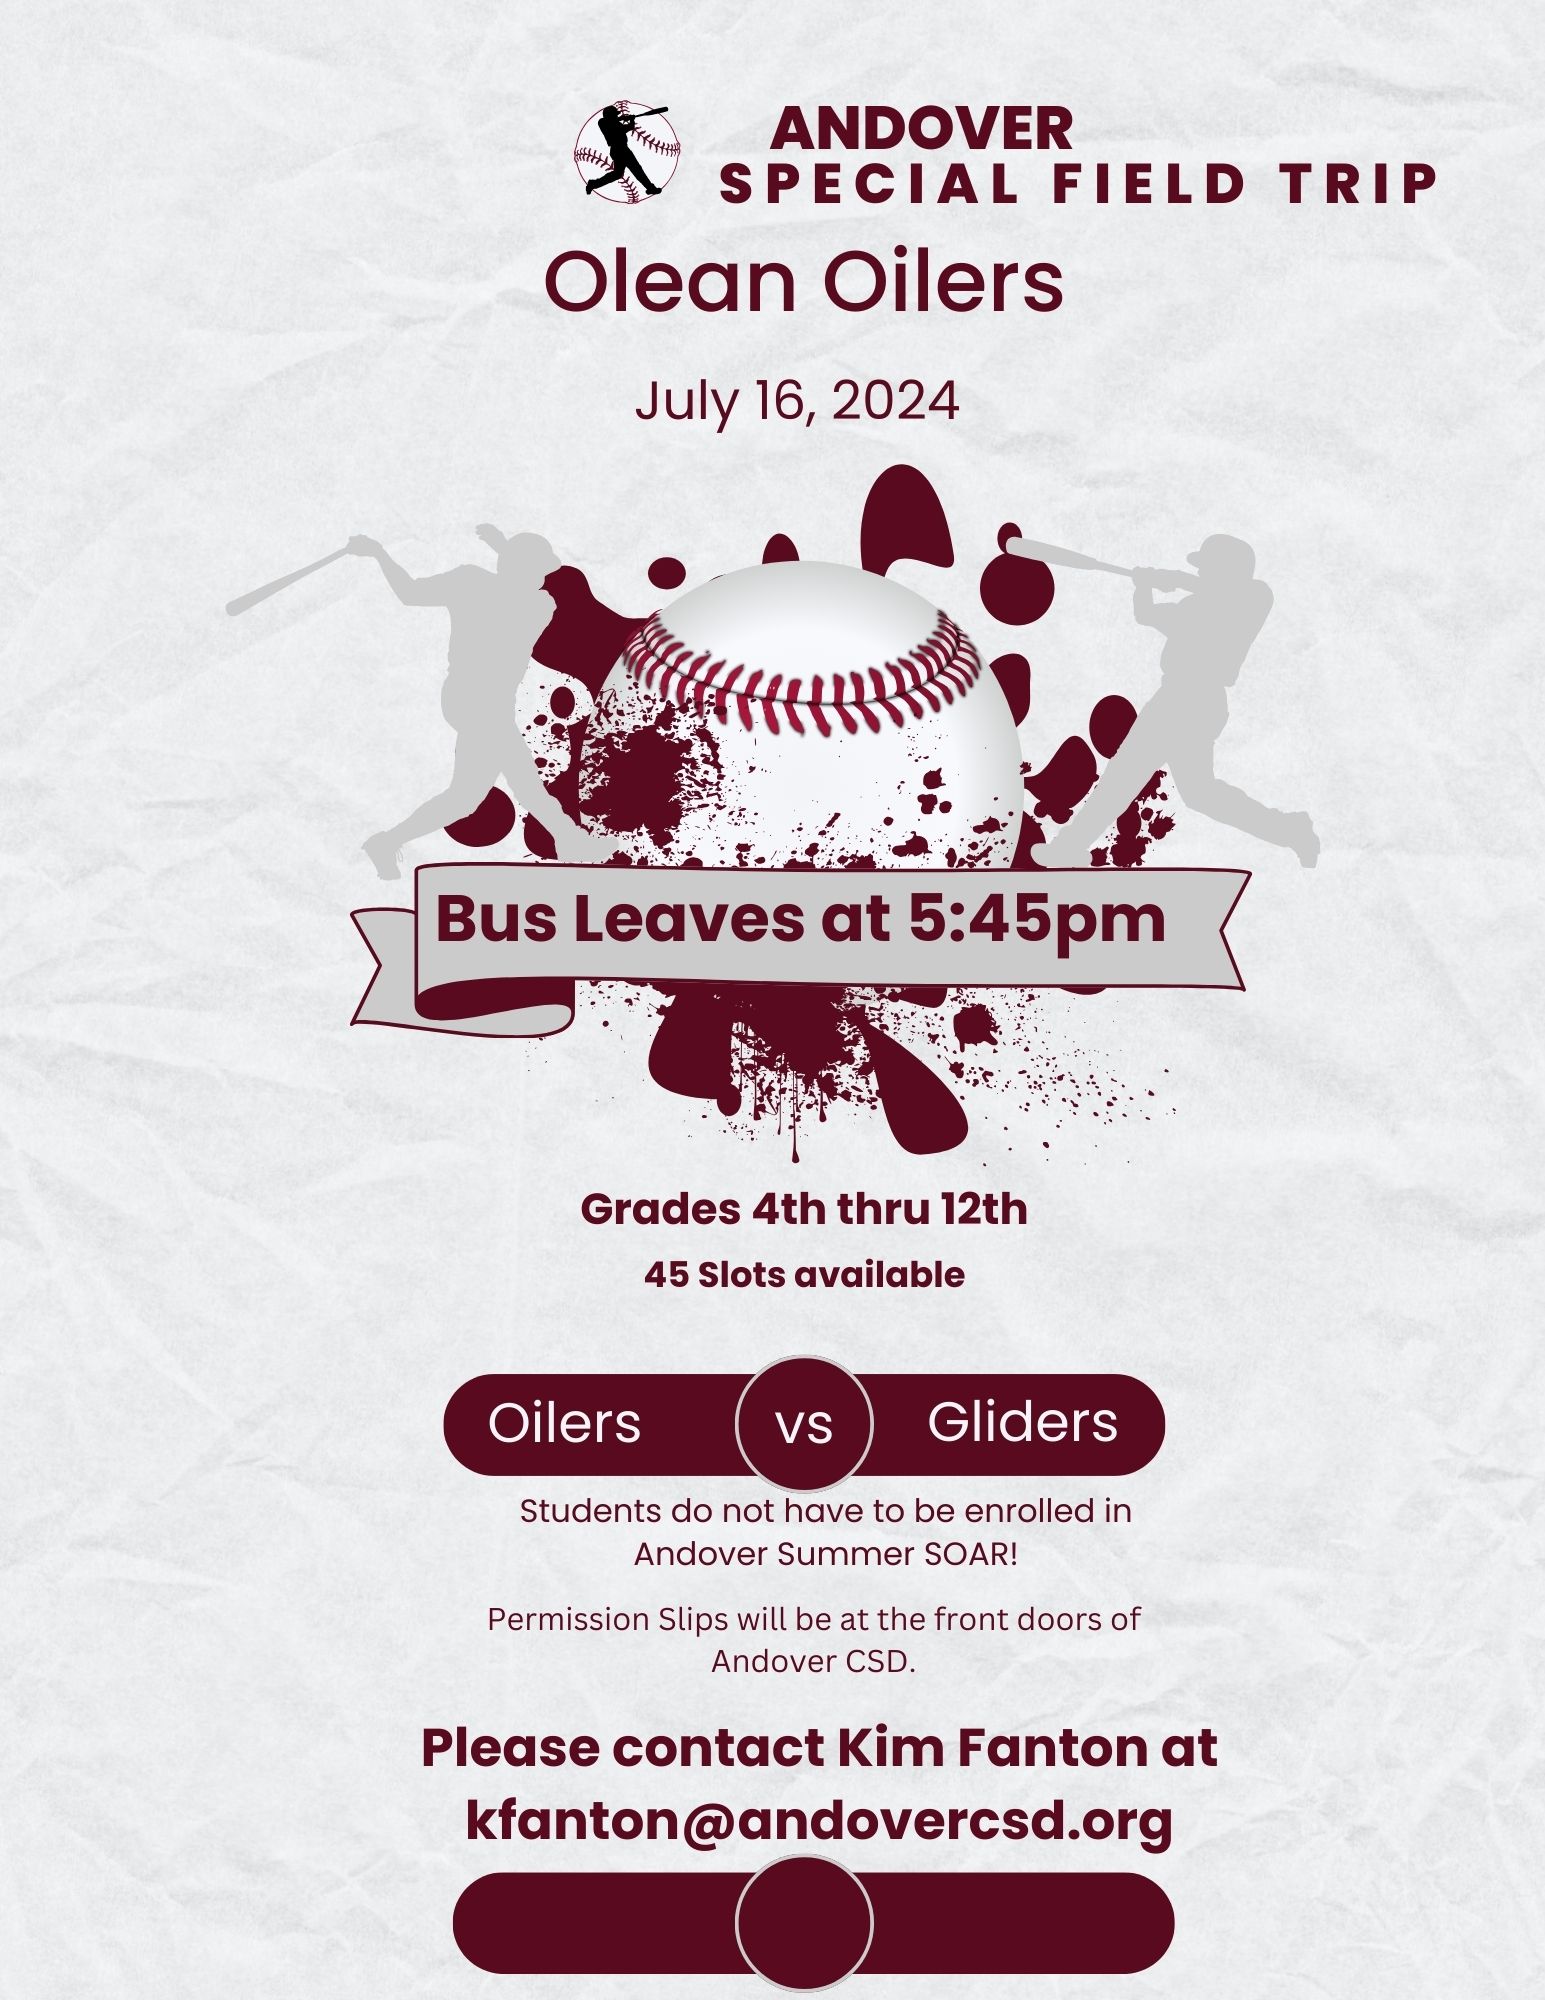 Olean Oilers Field Trip for 4th-12th Grade Andover Central School Students on July 16, 2024